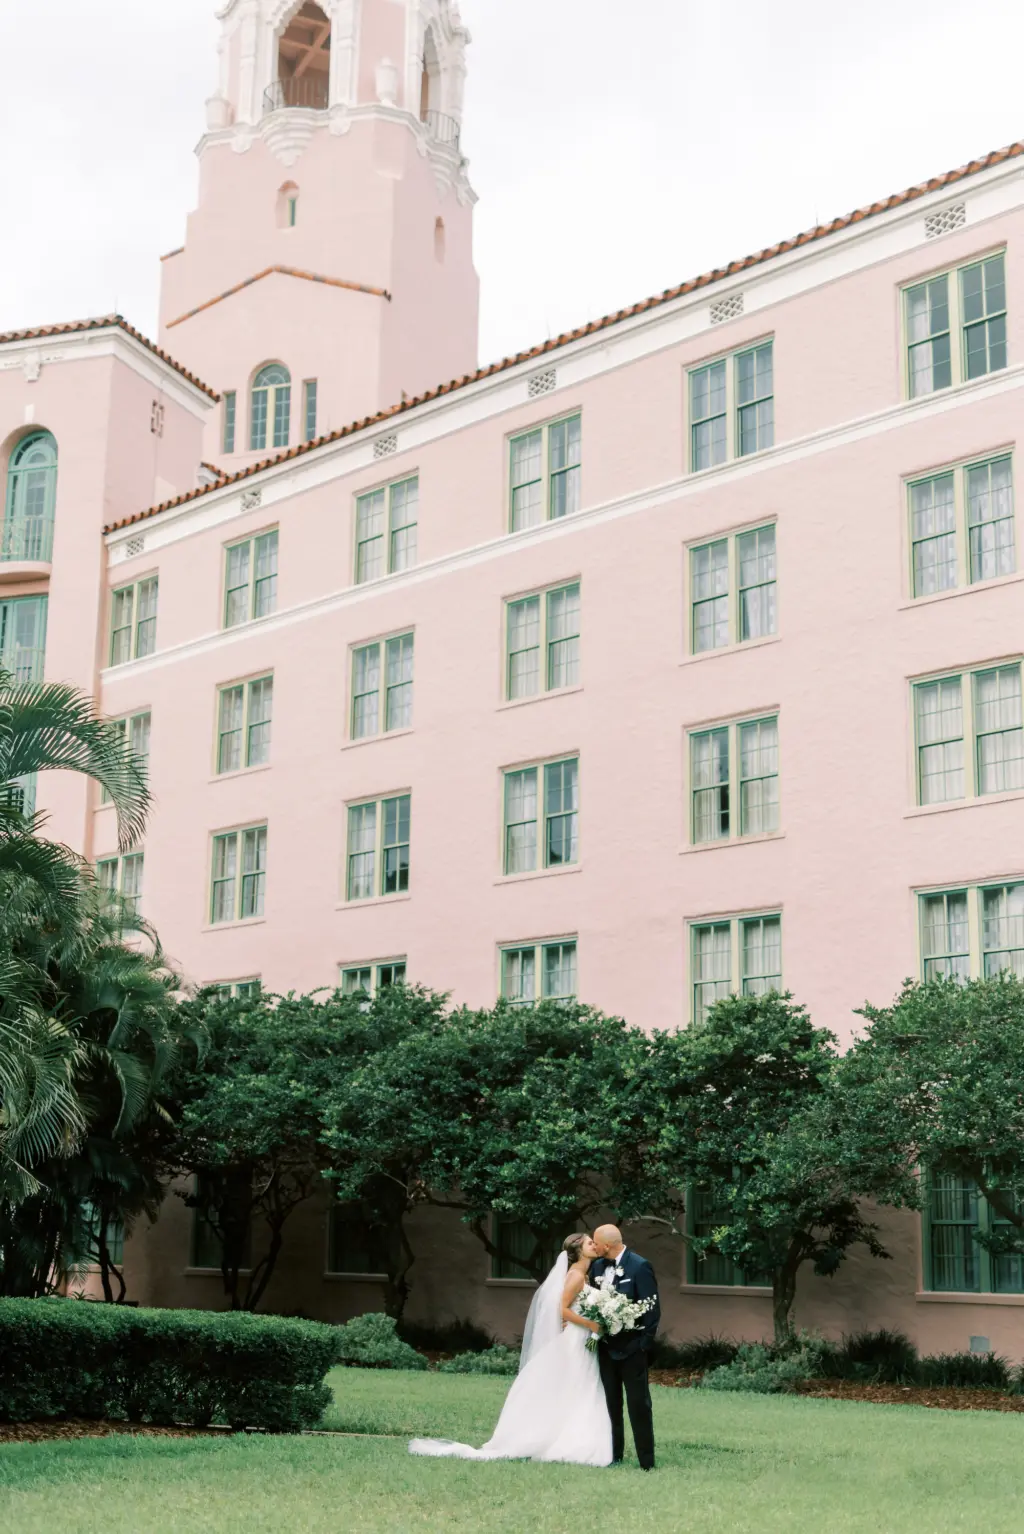 Bride and Groom Outdoor Courtyard Wedding Portrait | Downtown St Pete Venue The Vinoy